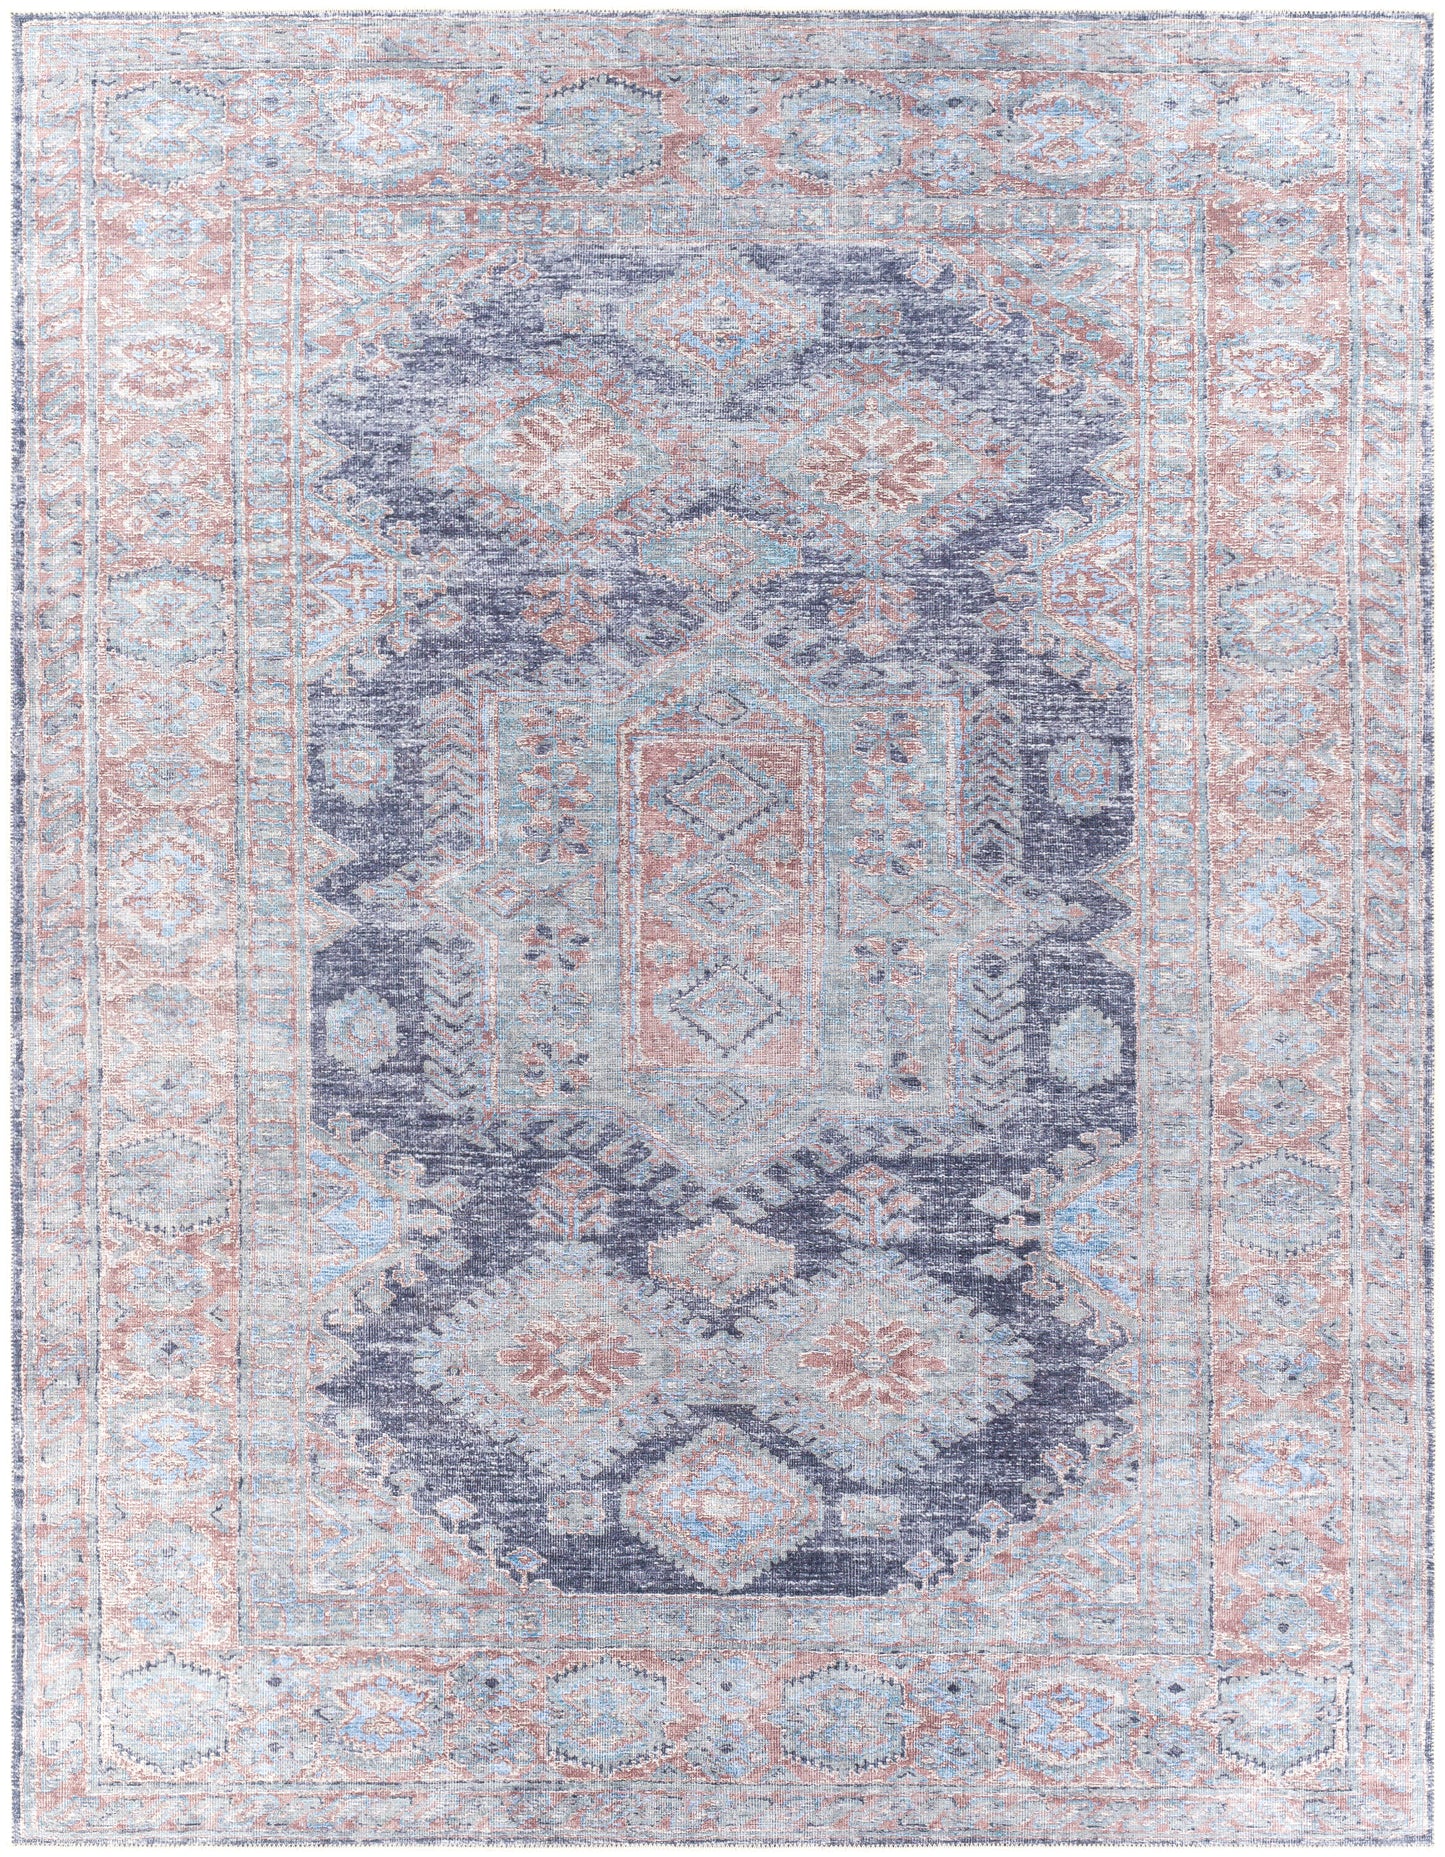 Amelie 26720 Machine Woven Synthetic Blend Indoor Area Rug by Surya Rugs